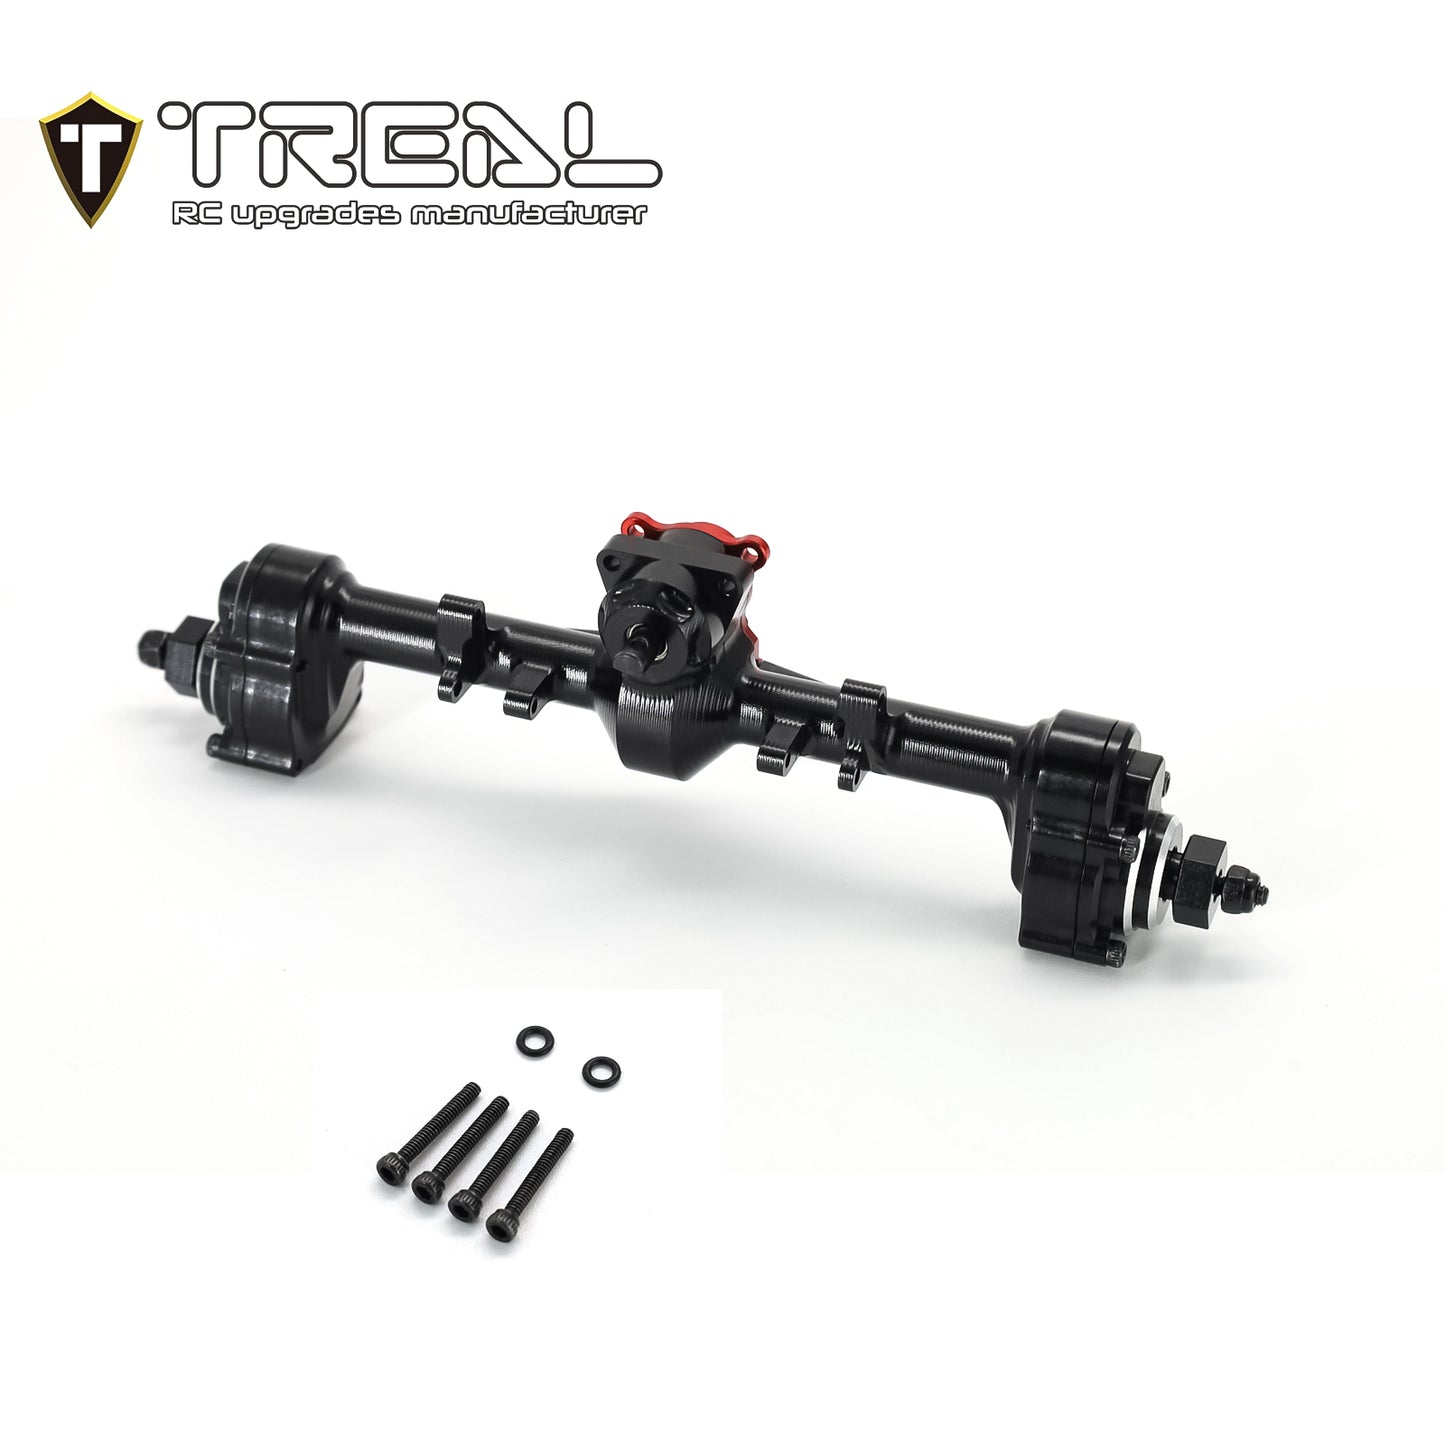 TREAL SCX24 Rear Portal Axles Complete Kit, Aluminum 7075 CNC Machined Axle Housing for Axial 1/24 SCX24